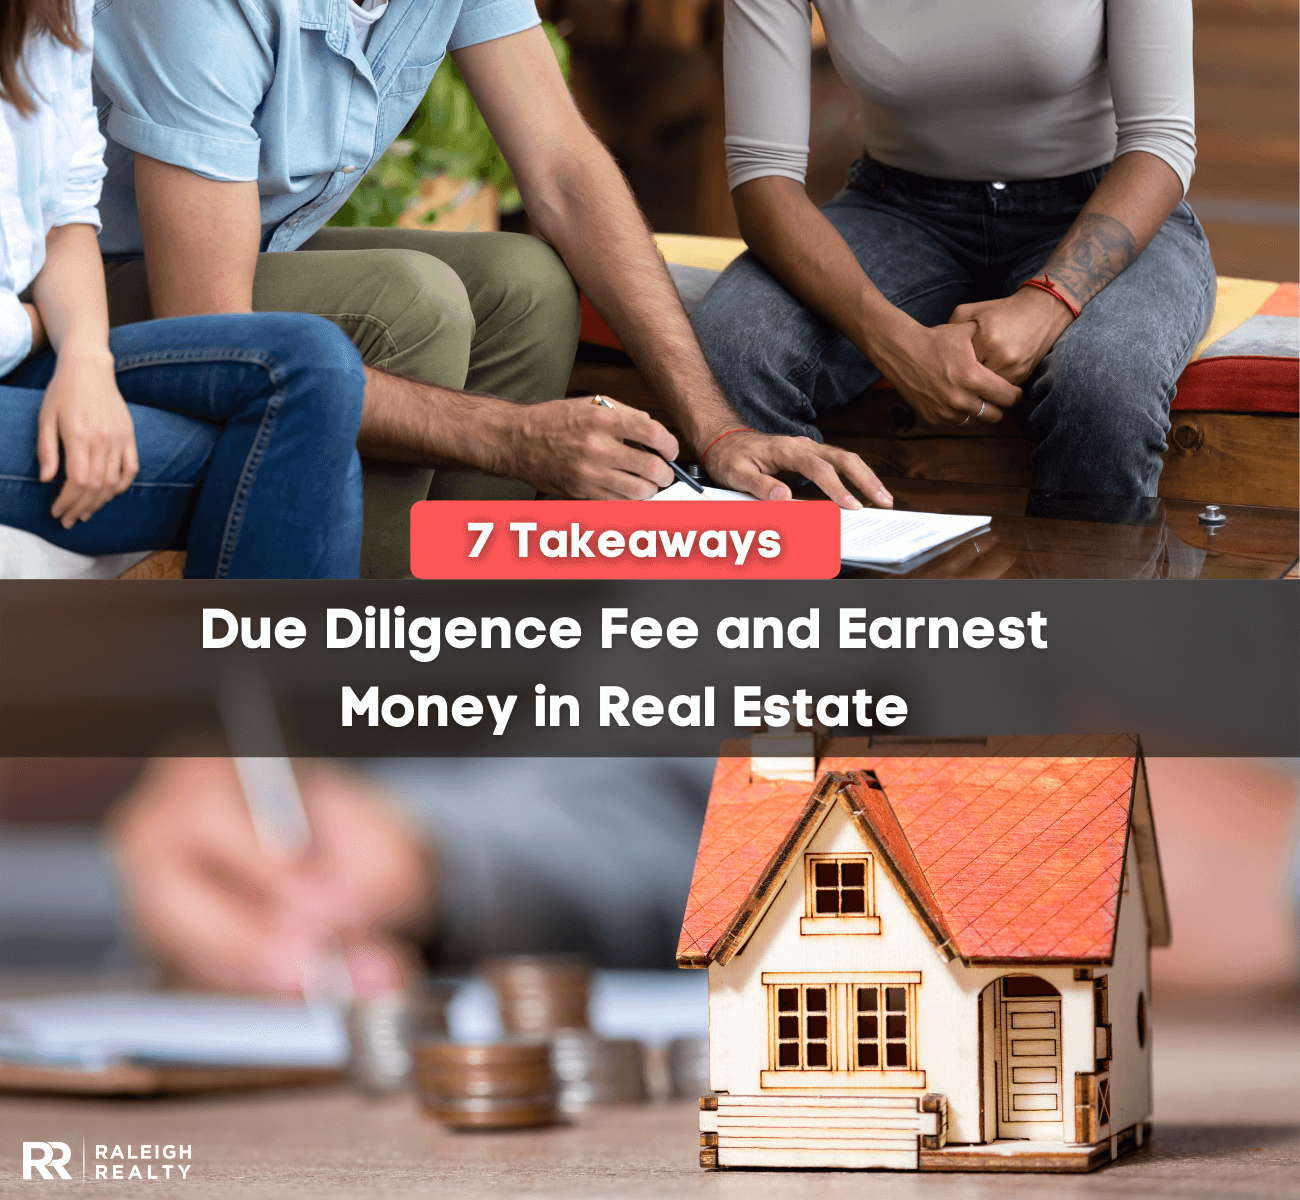 7 Takeaways: Due Diligence Fee and Earnest Money in Real Estate